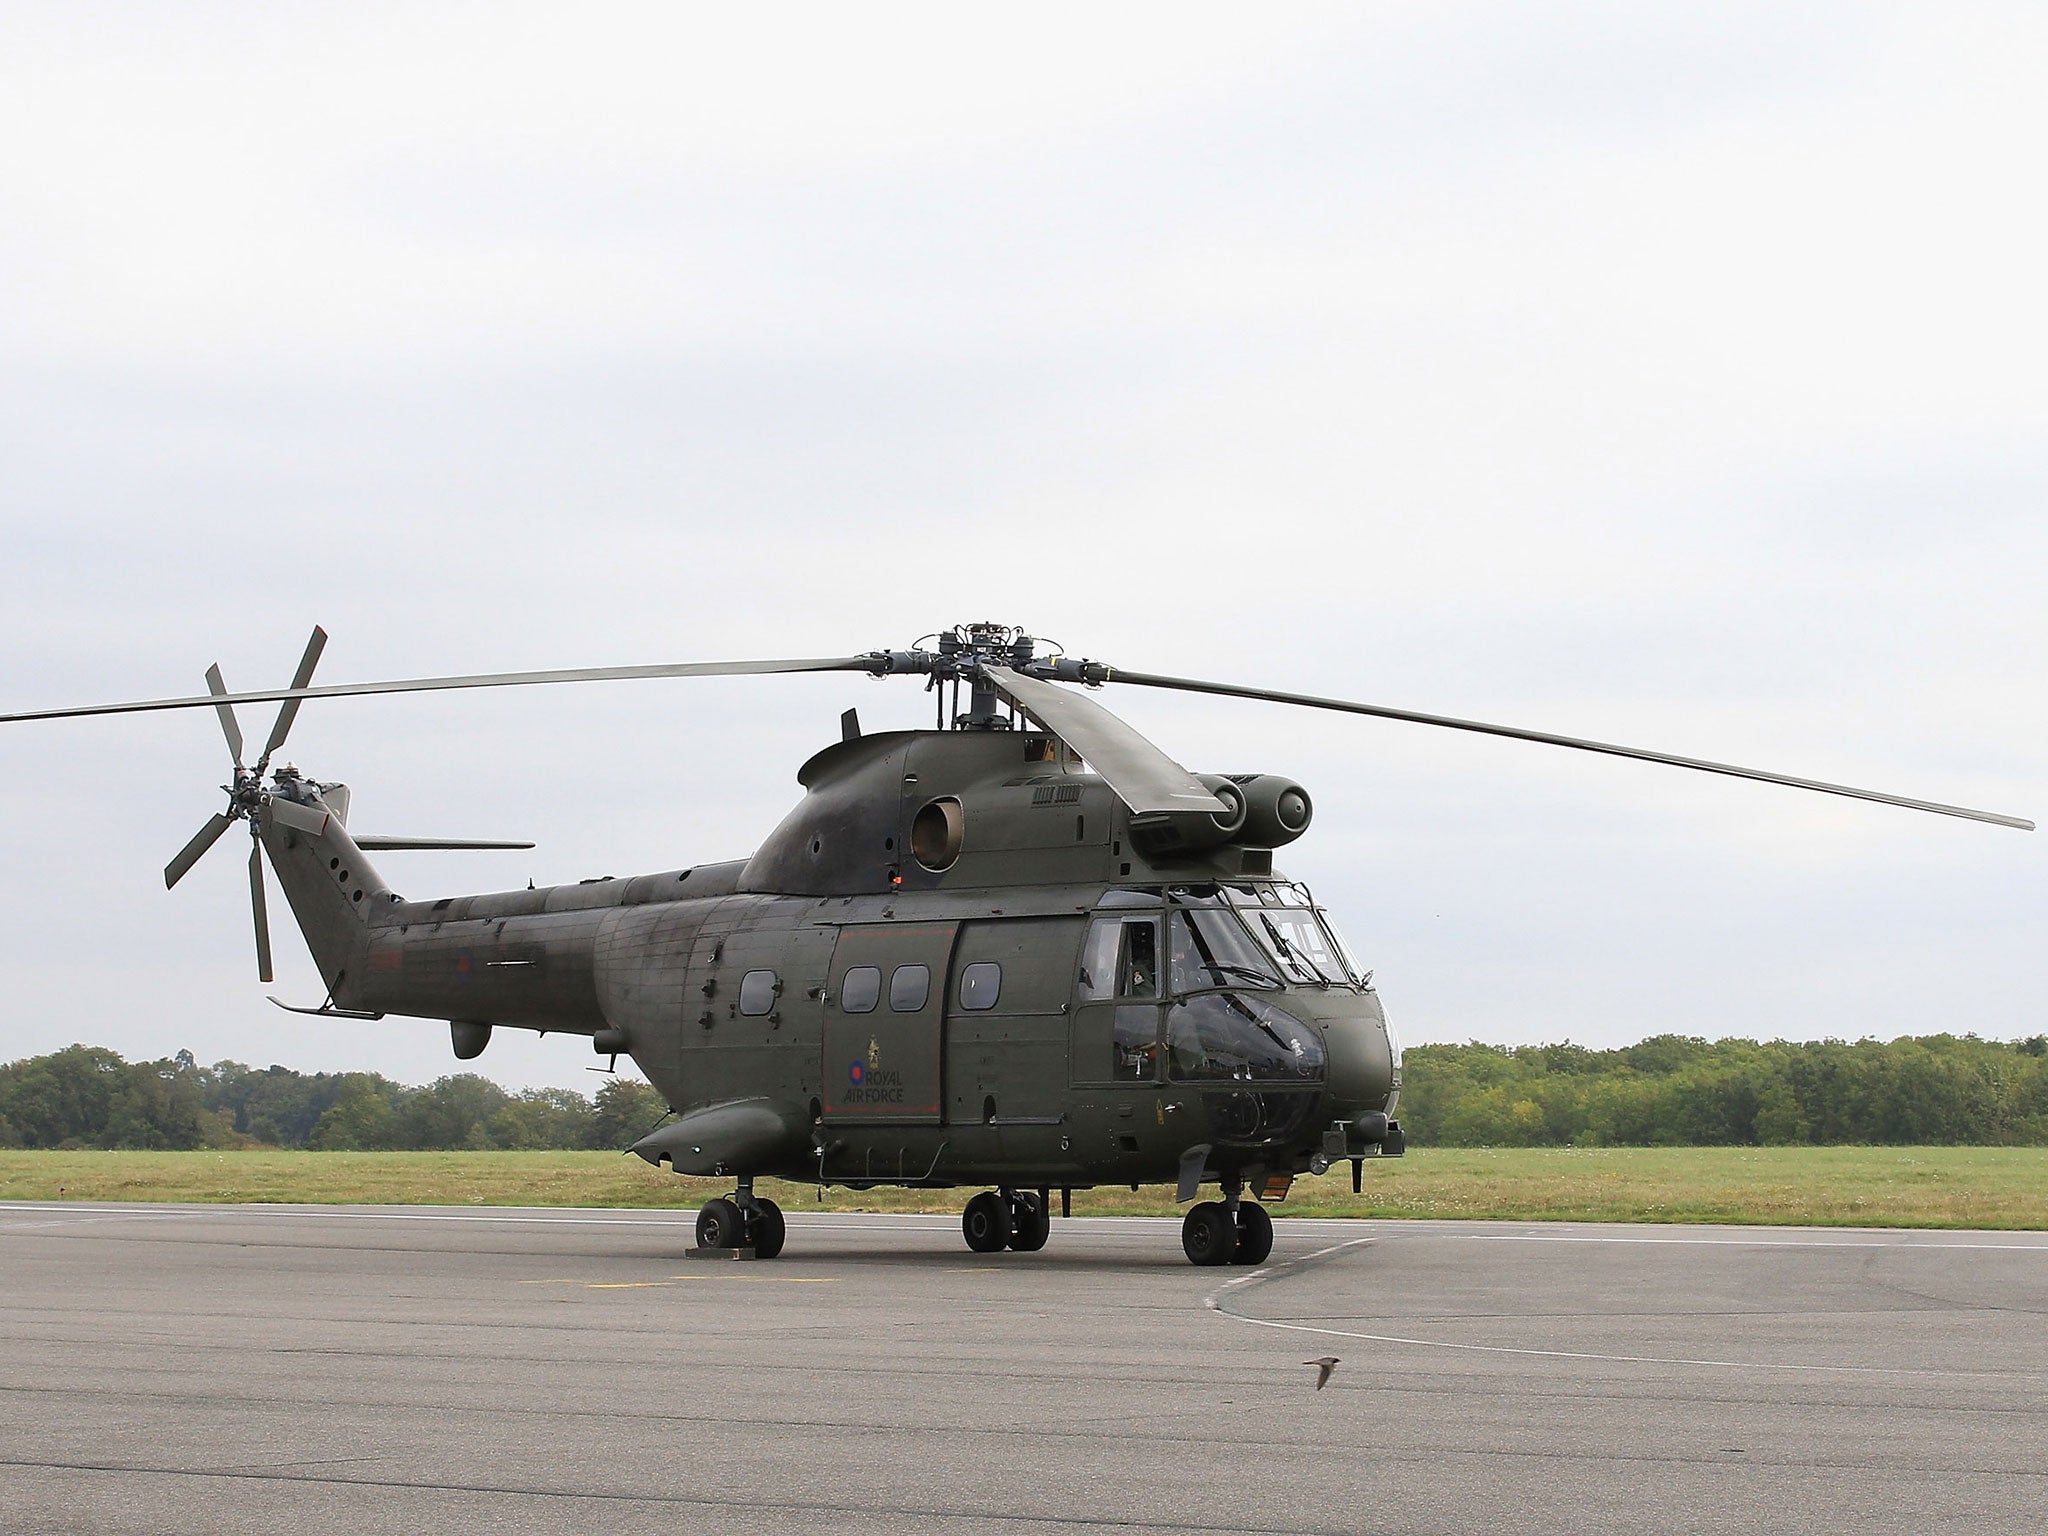 An RAF Puma helicopter, similar to the aircraft involved in the crash